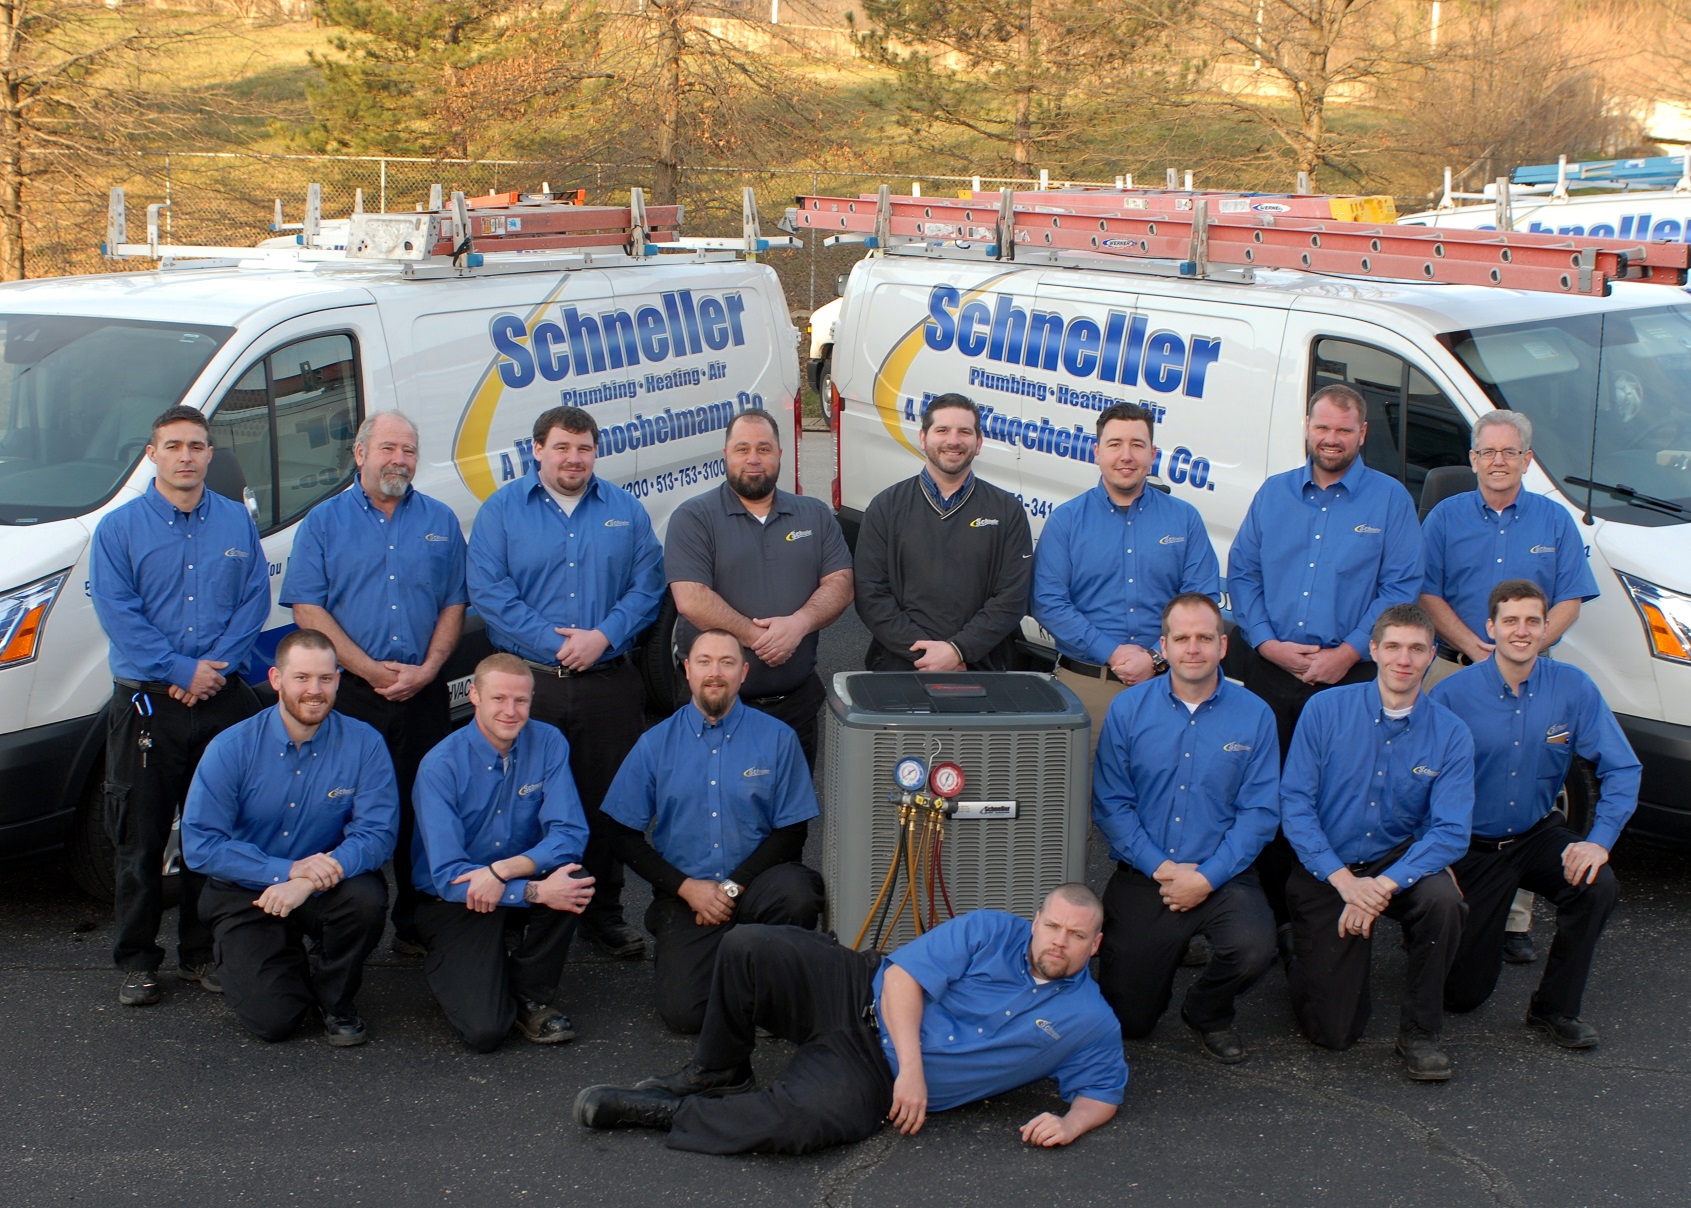 Schneller Knochelmann team standing together in front of two service vans in a parking lot.